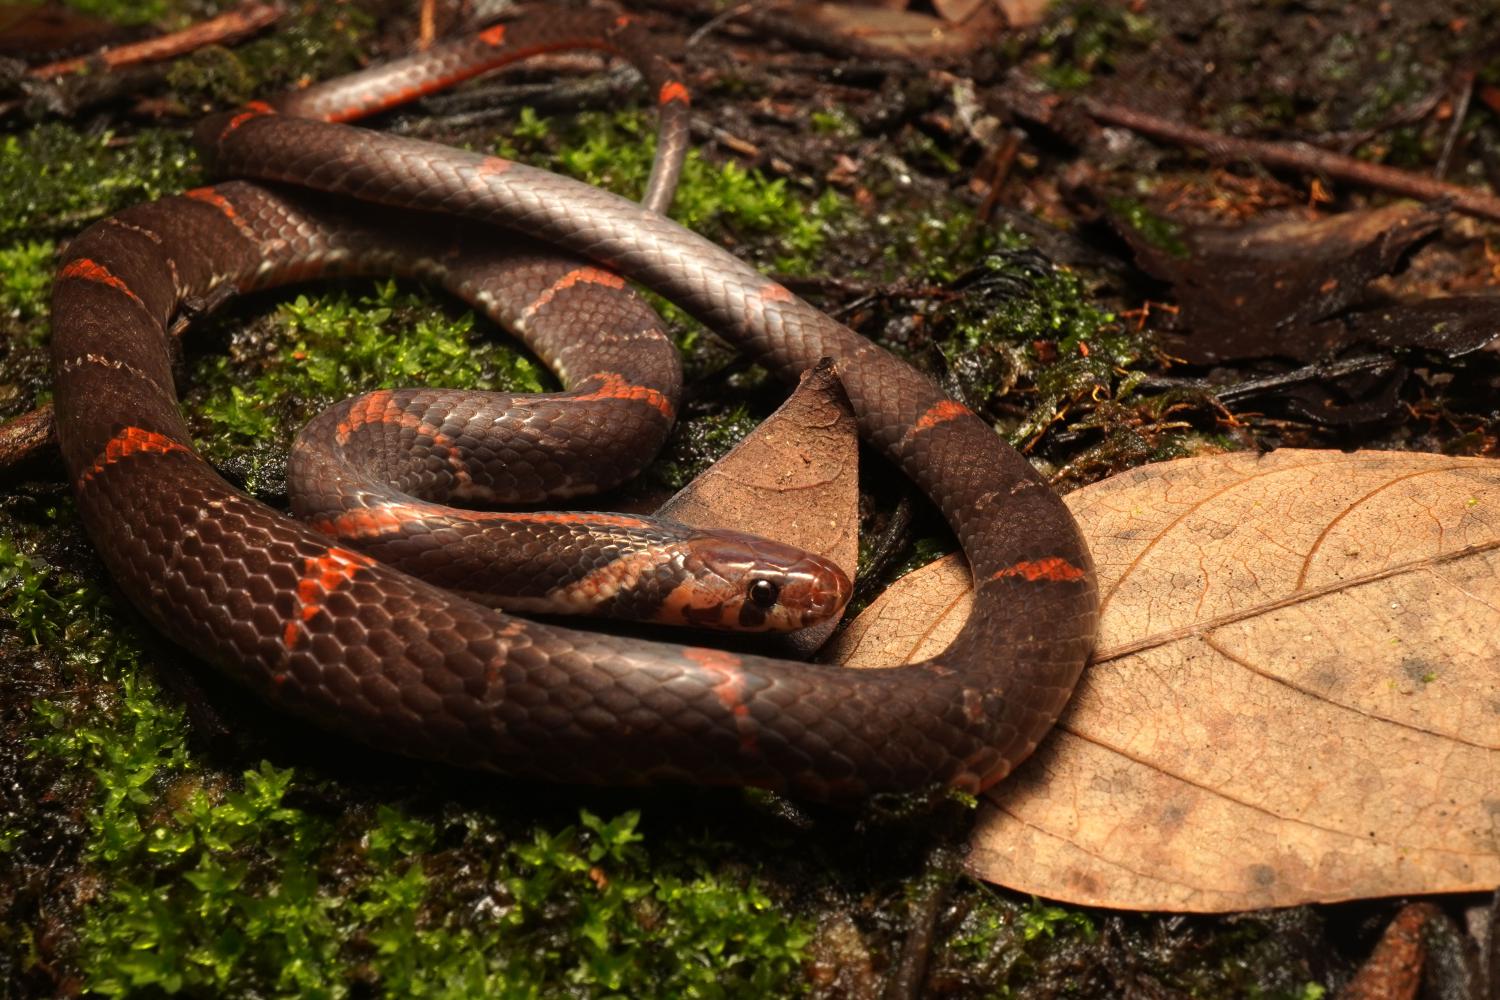 Call to save rare snake habitat follows red coral kukri sightings in